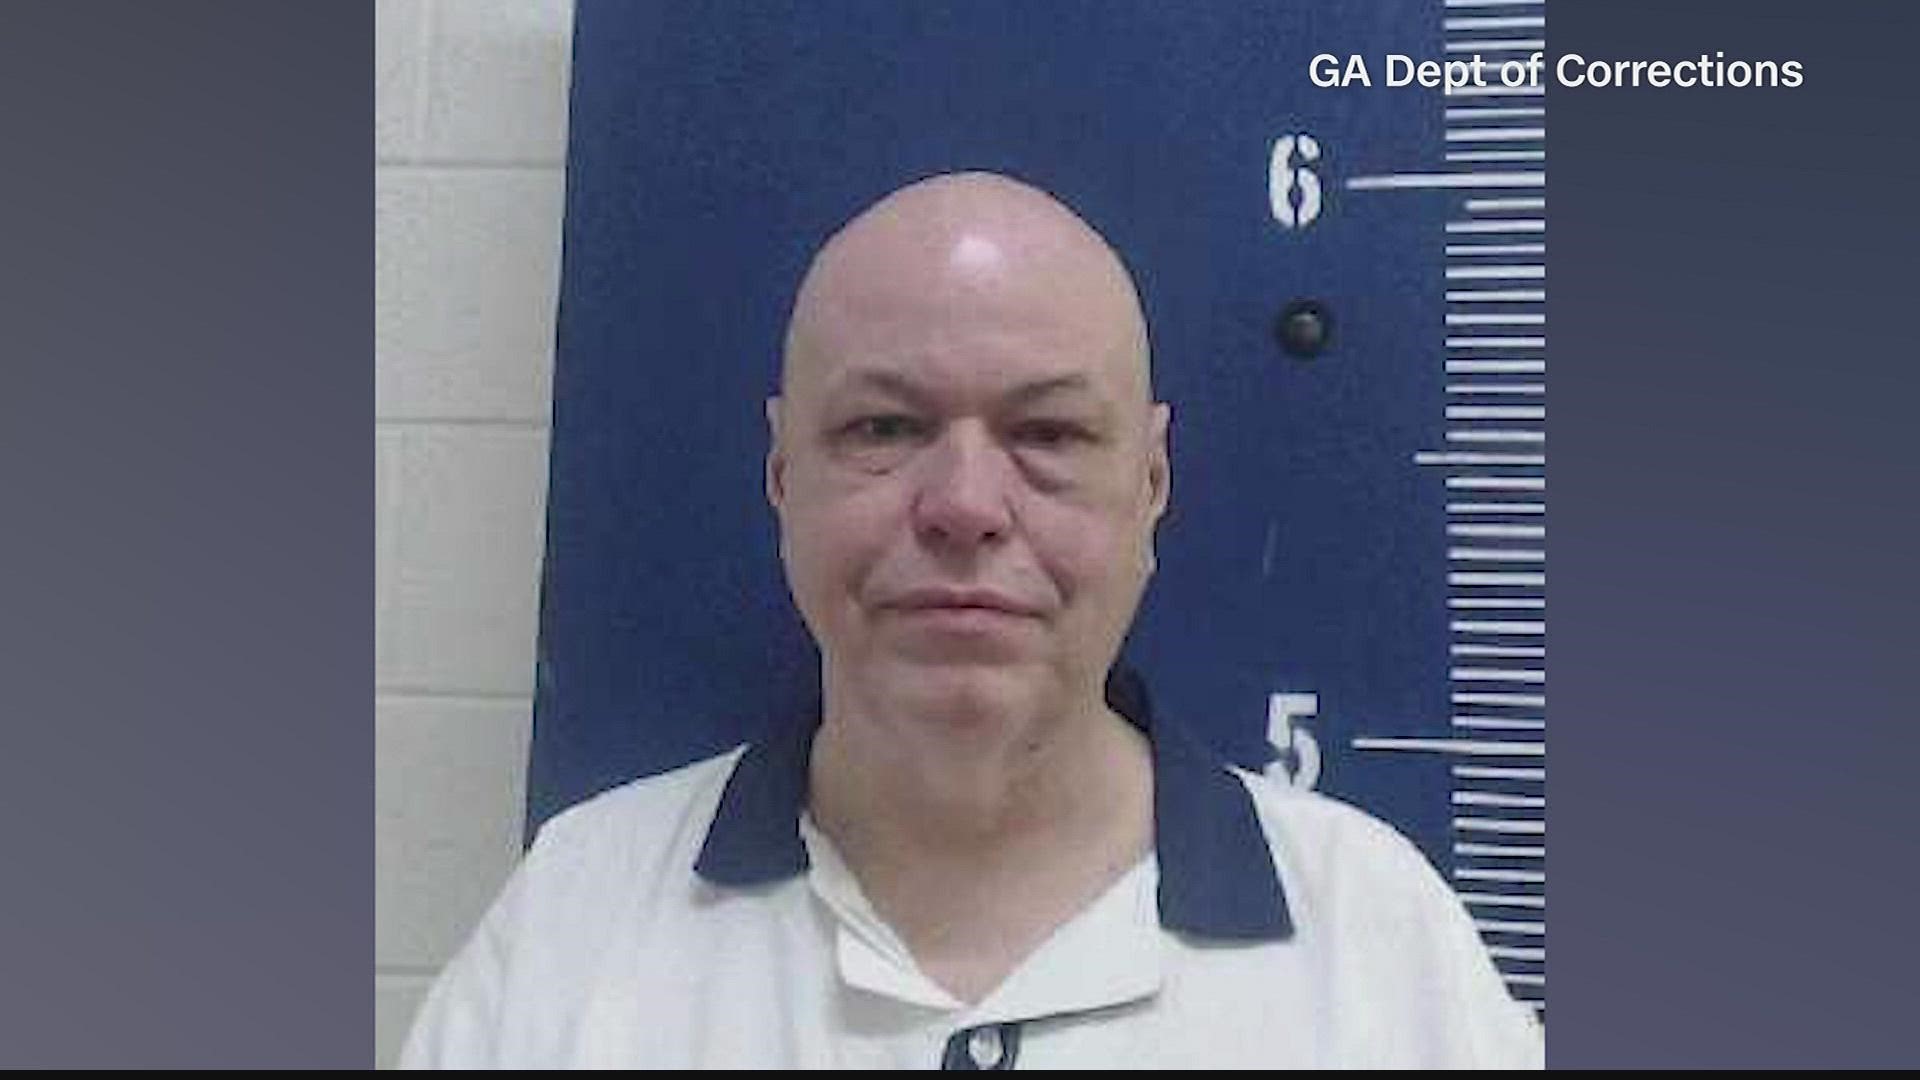 Virgil Delano Presnell Jr. is set to be executed.